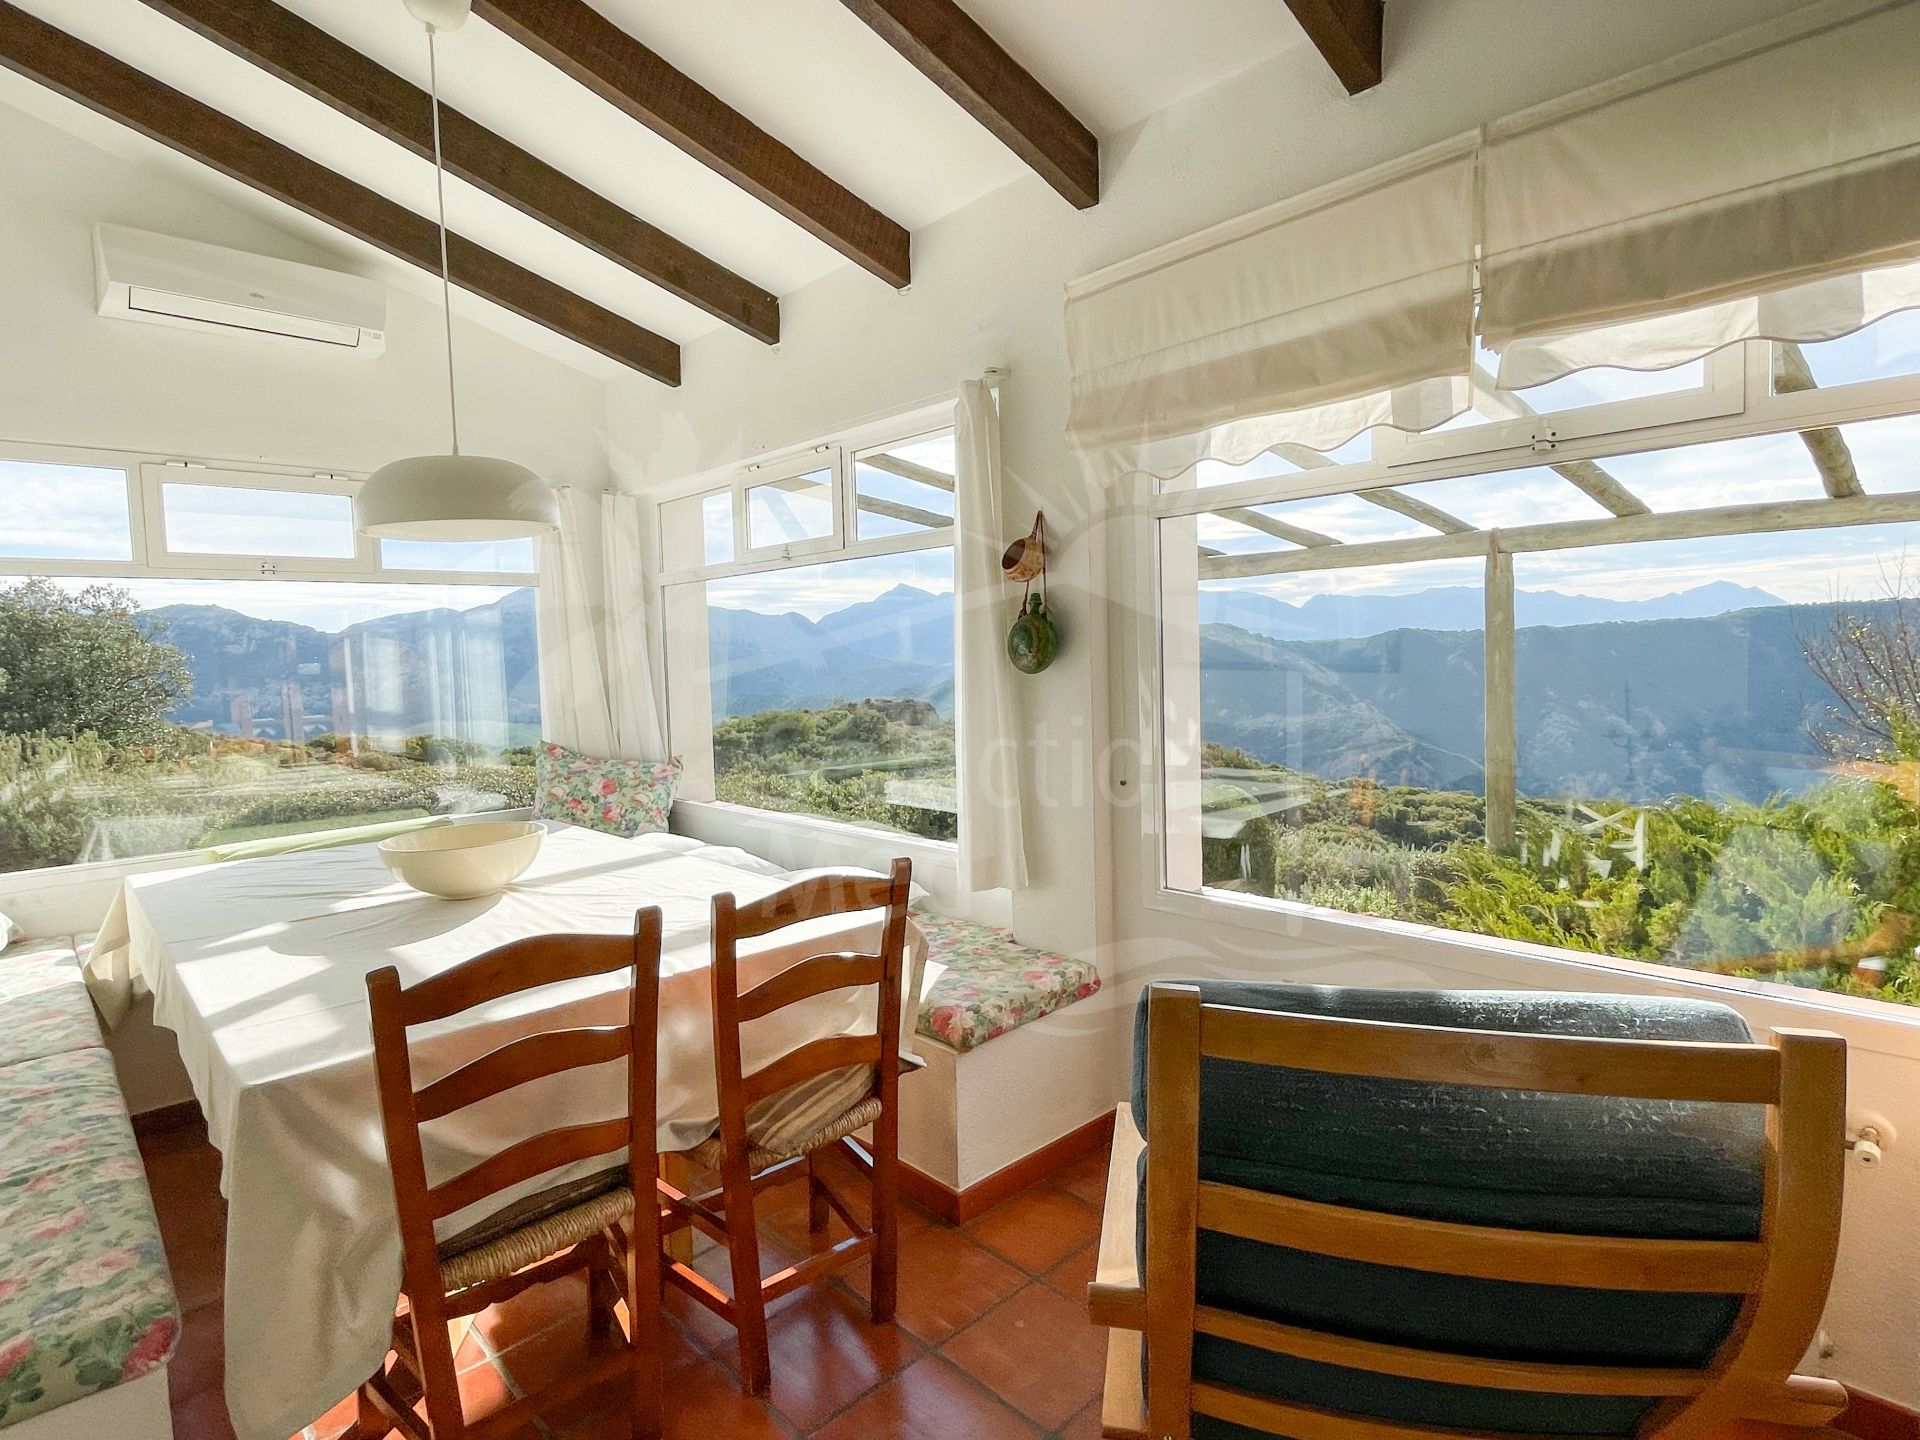 En charter house with spectacular views.